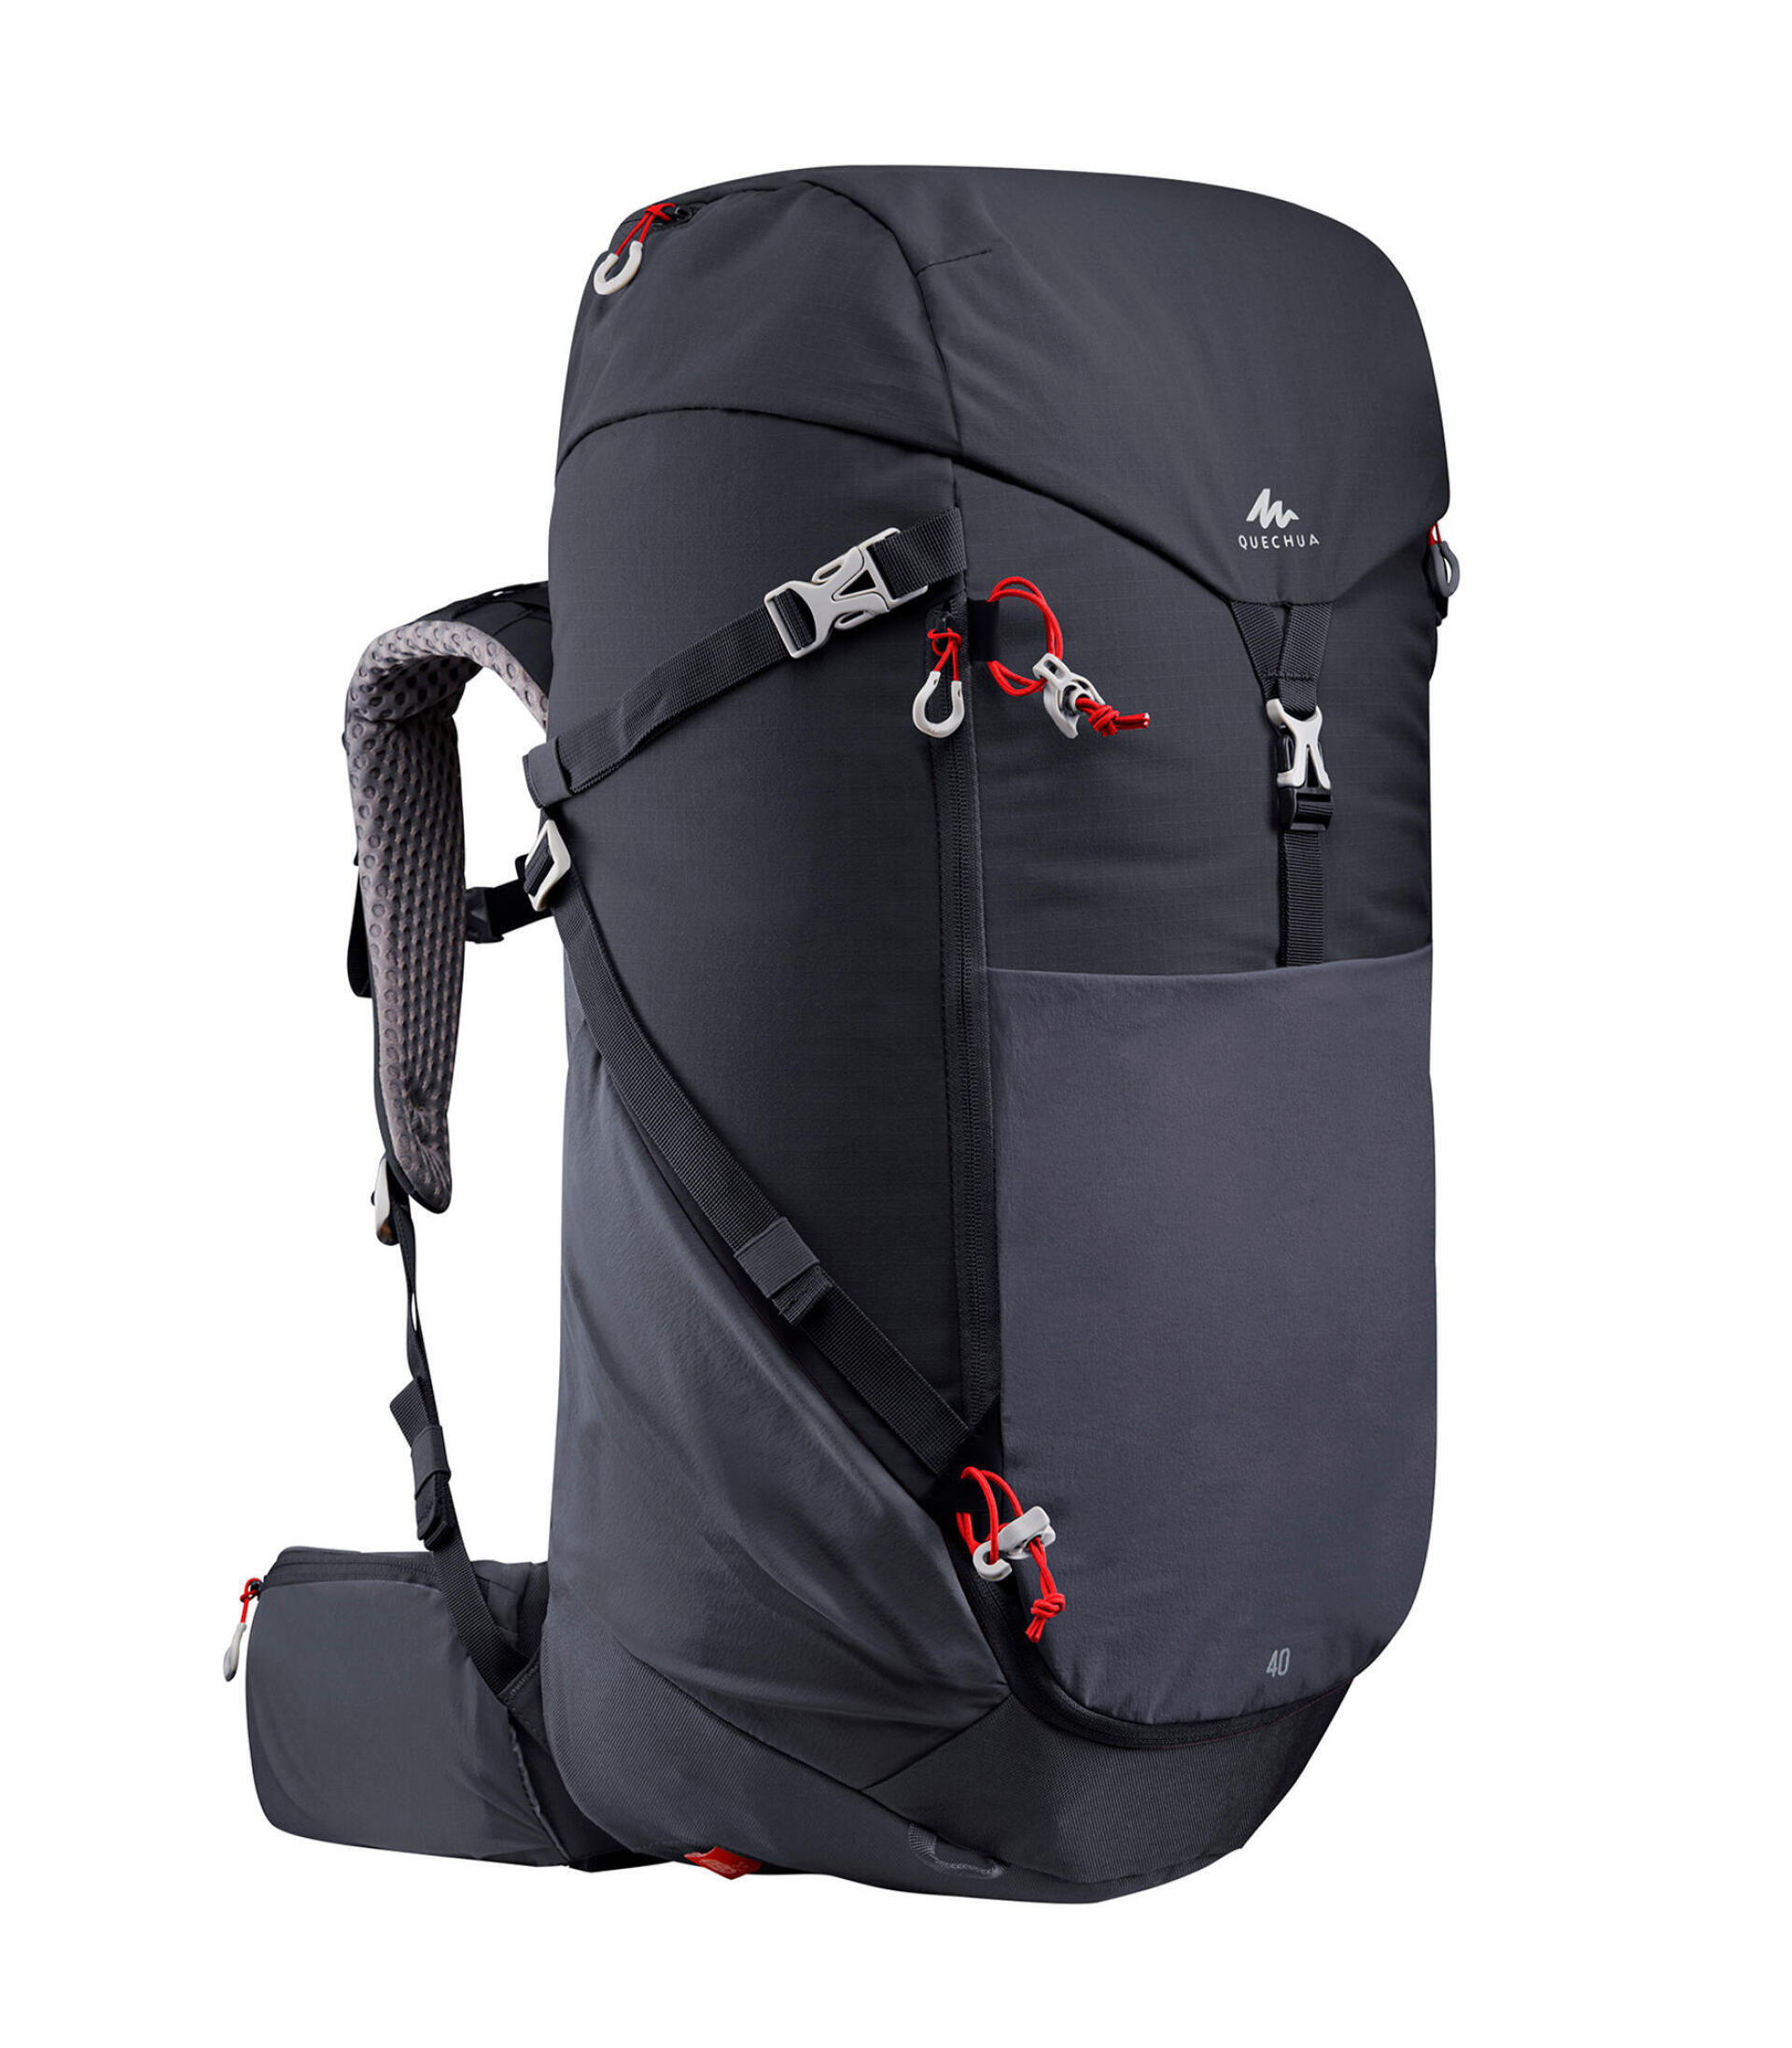 Buy Decathlon 10 Ltrs 39 cm Backpack (NH-100_Grey) at Amazon.in